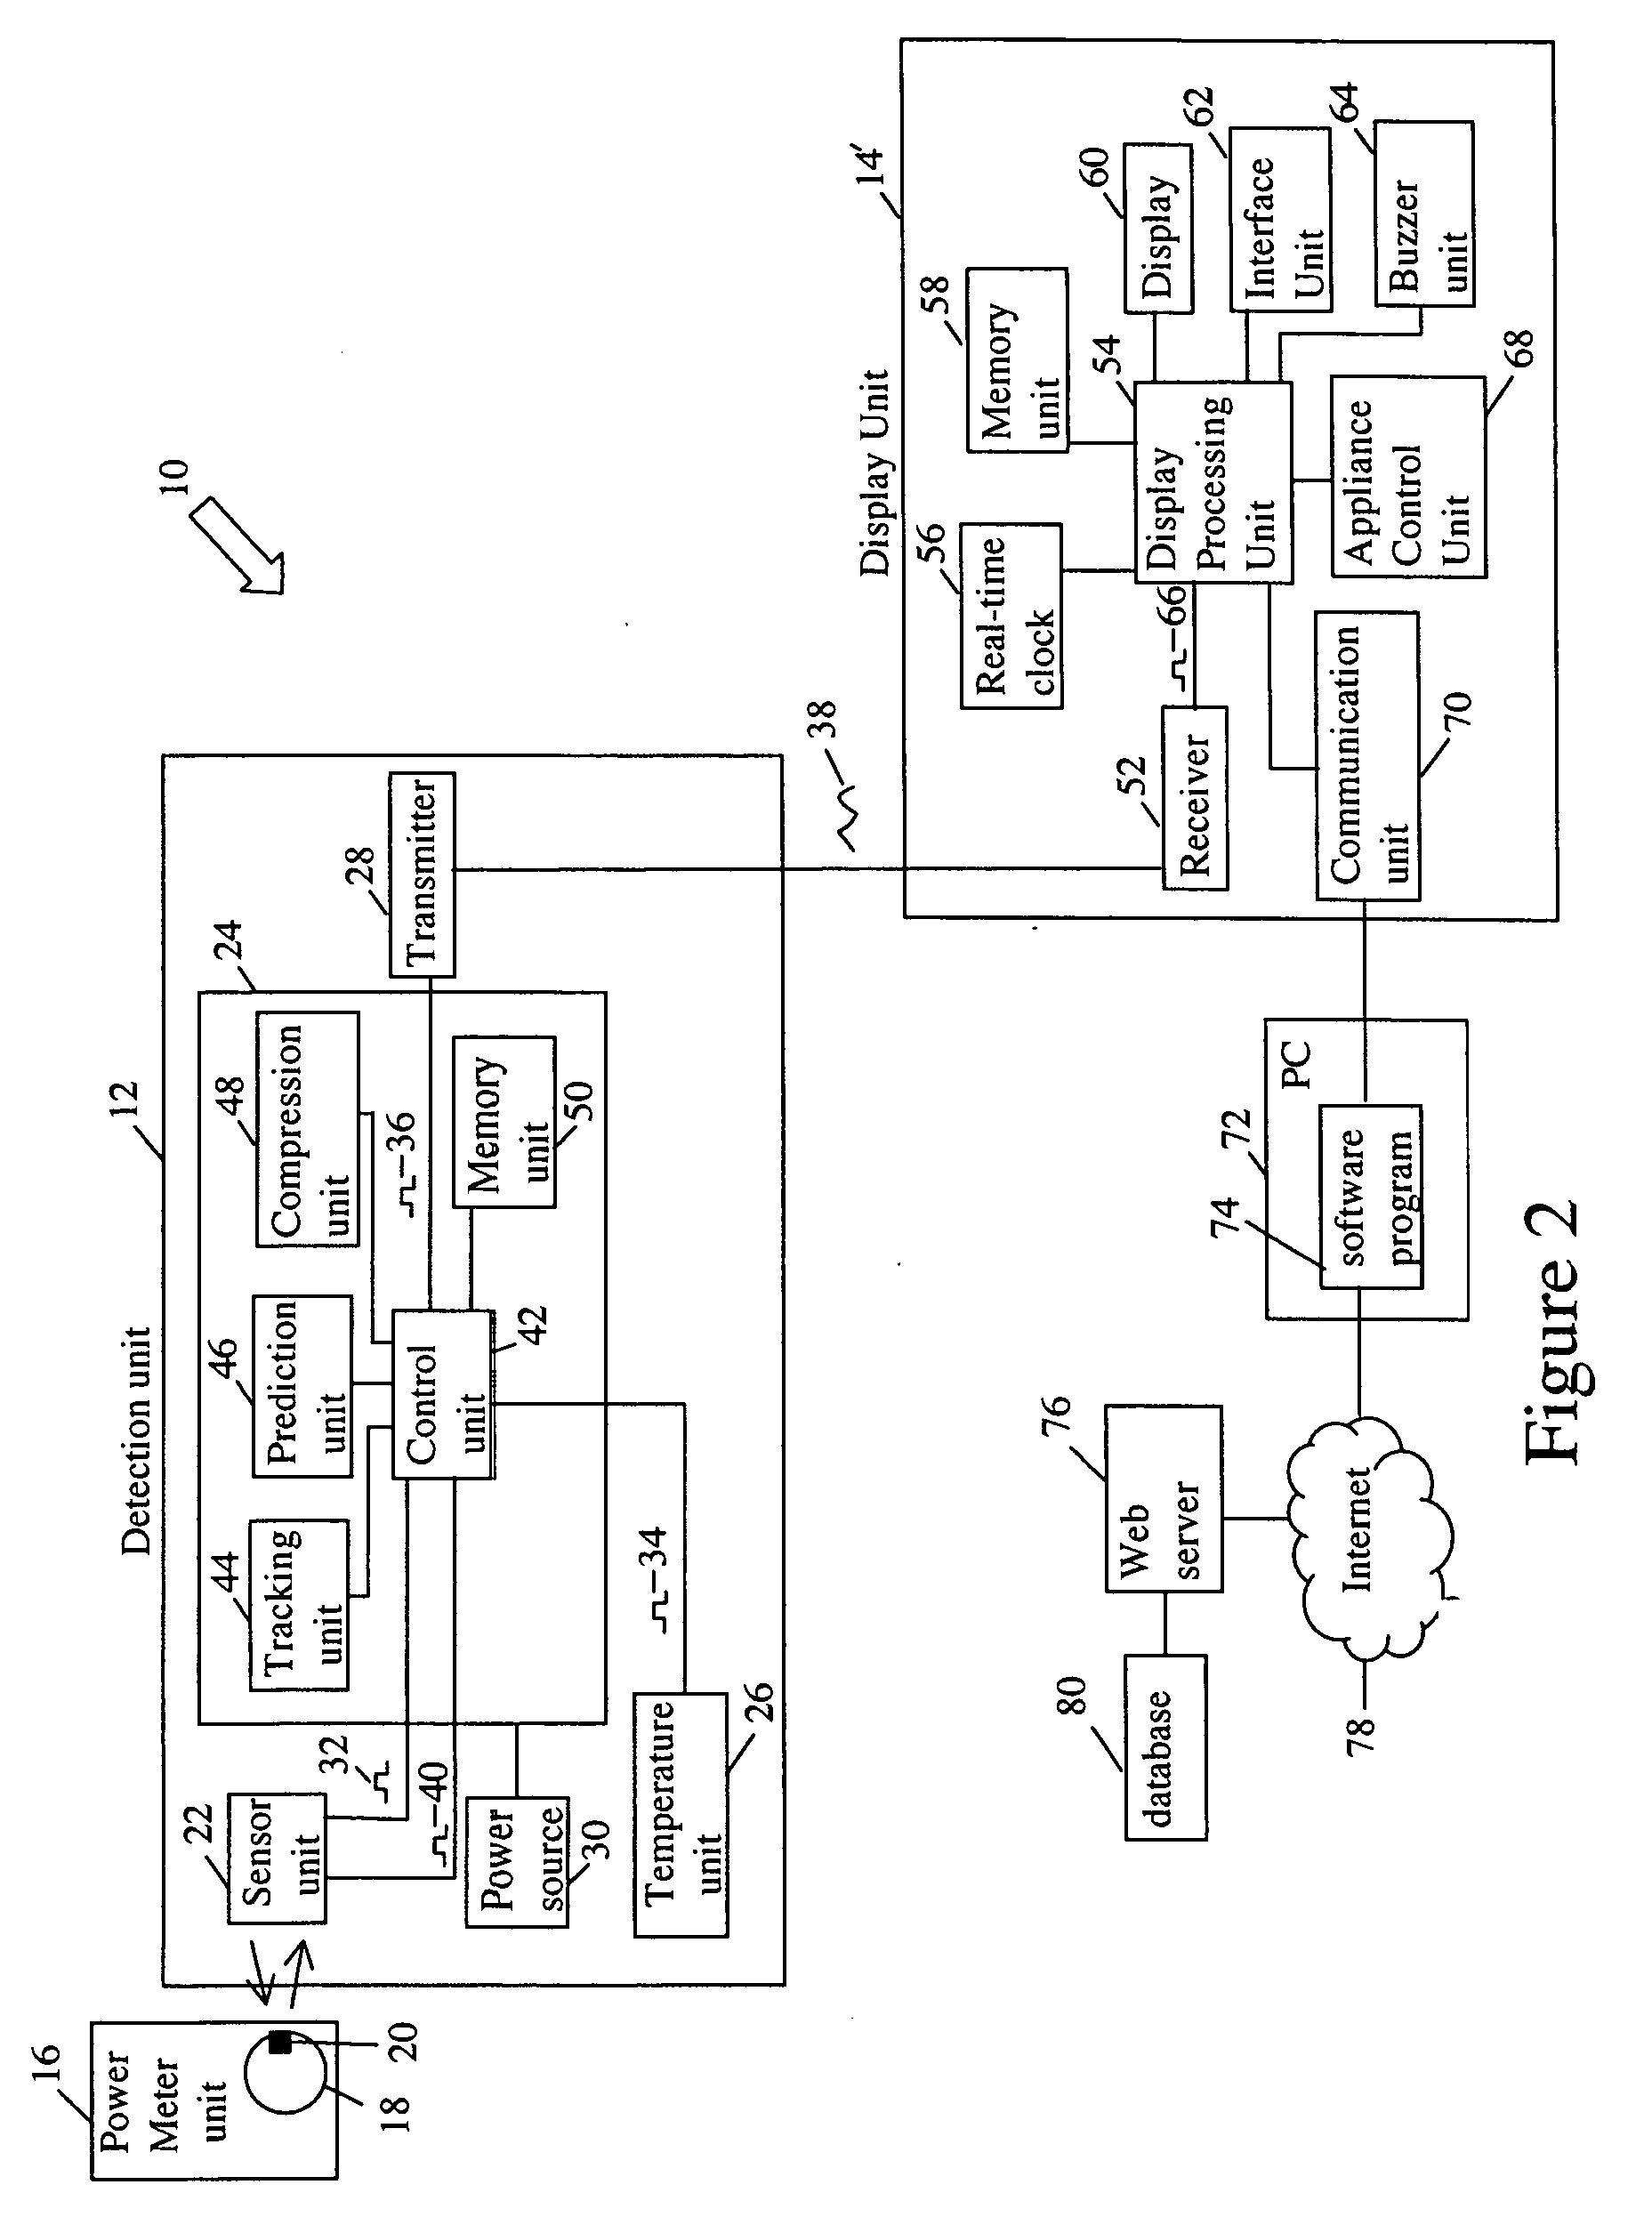 System and method for reading power meters